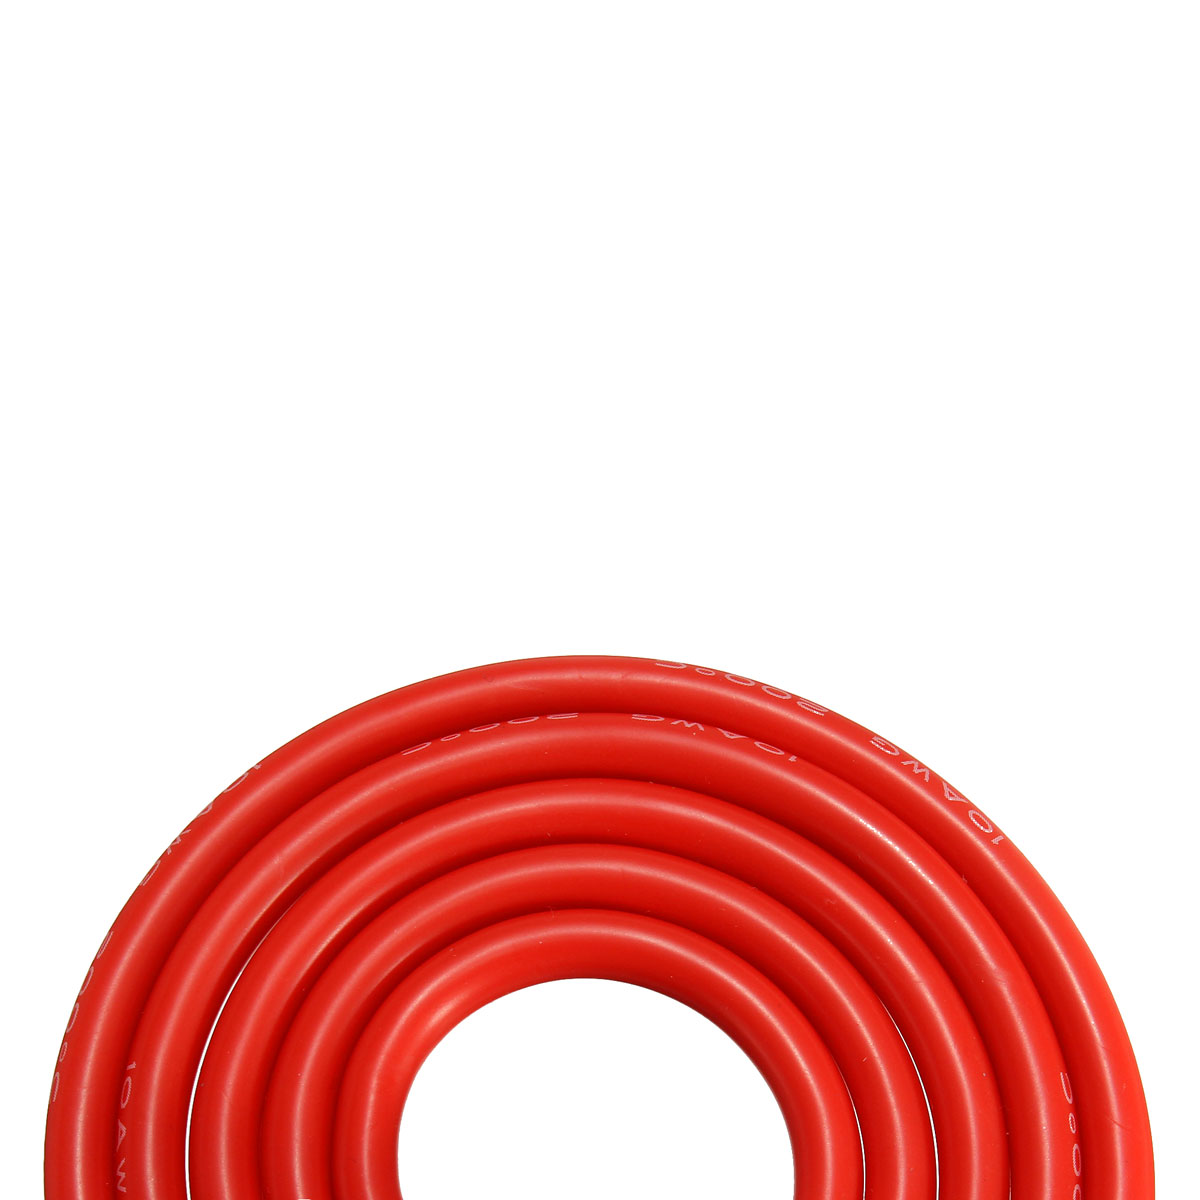 DANIU-2-Meter-Red-Silicone-Wire-Cable-10121416182022AWG-Flexible-Cable-1170284-3